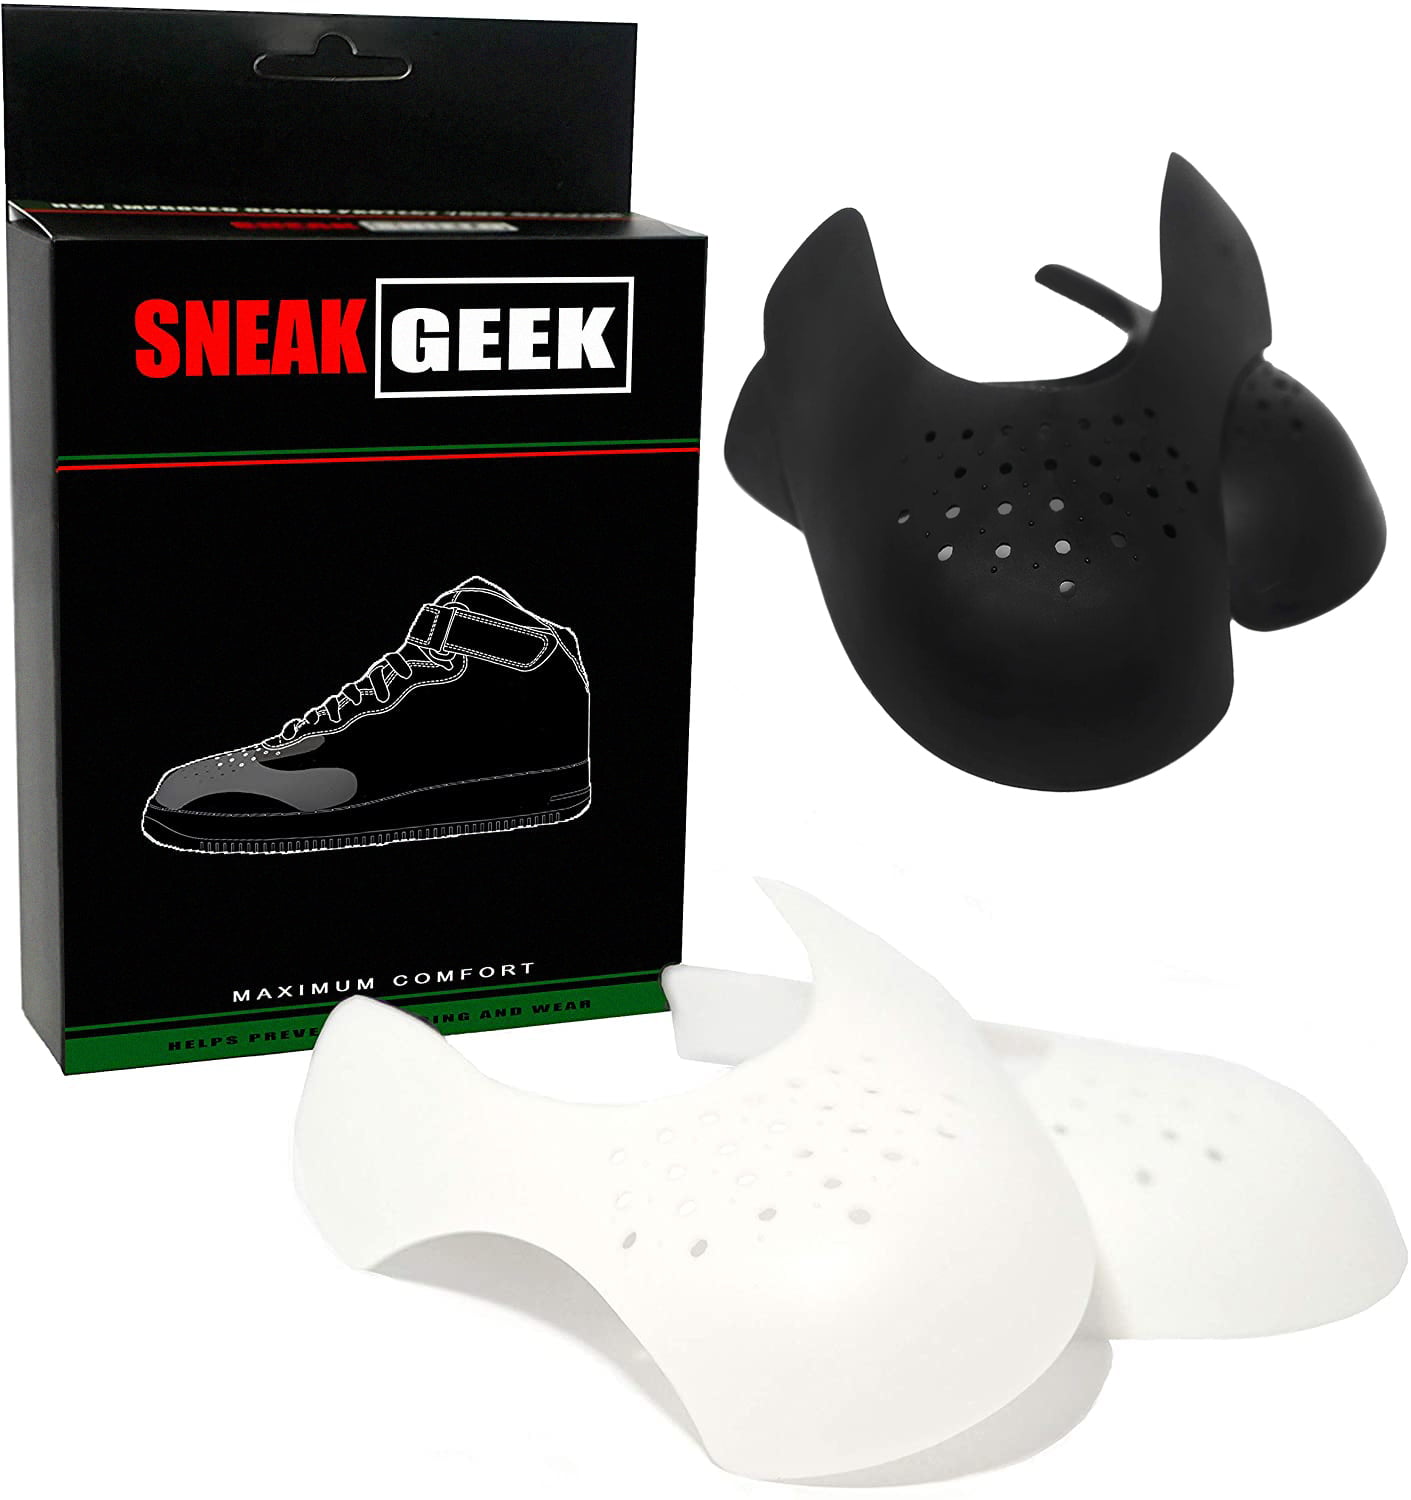 Sneaker Shoe Shields Shoe Toebox Protector Against Creases Prevent Sport Shoes Crease Wearable Inserts Shoes Prevent Front Creases 